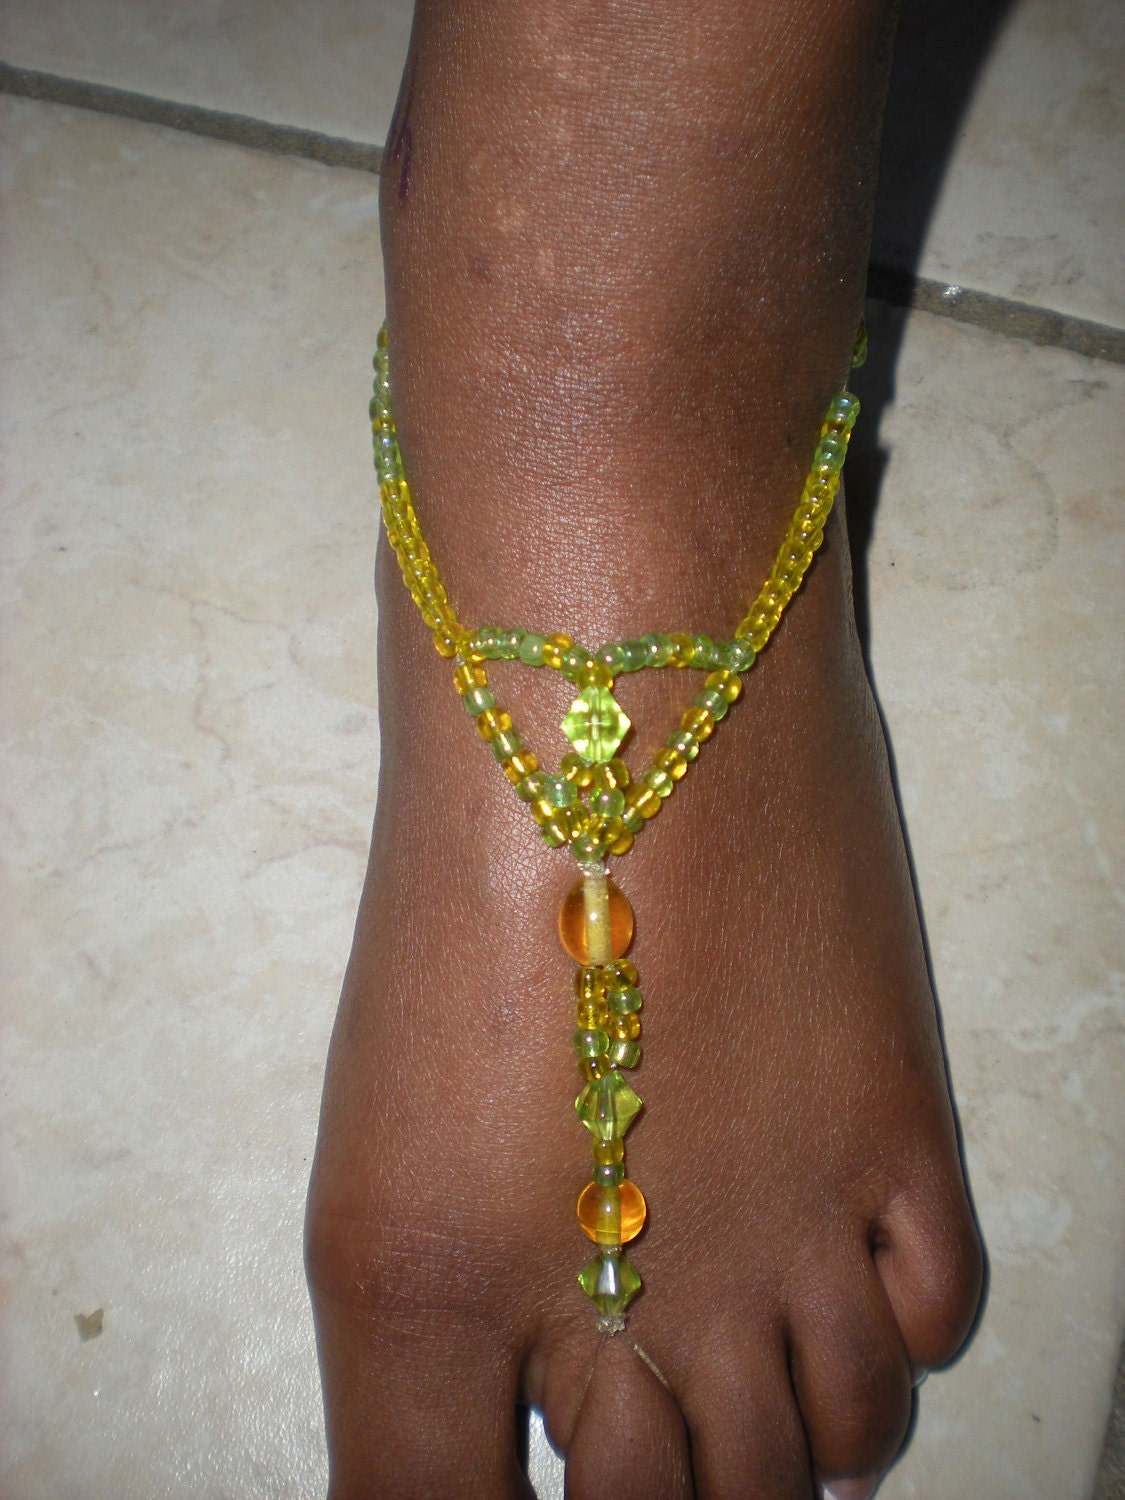 Greenish/yellowish Anklet/Footlet